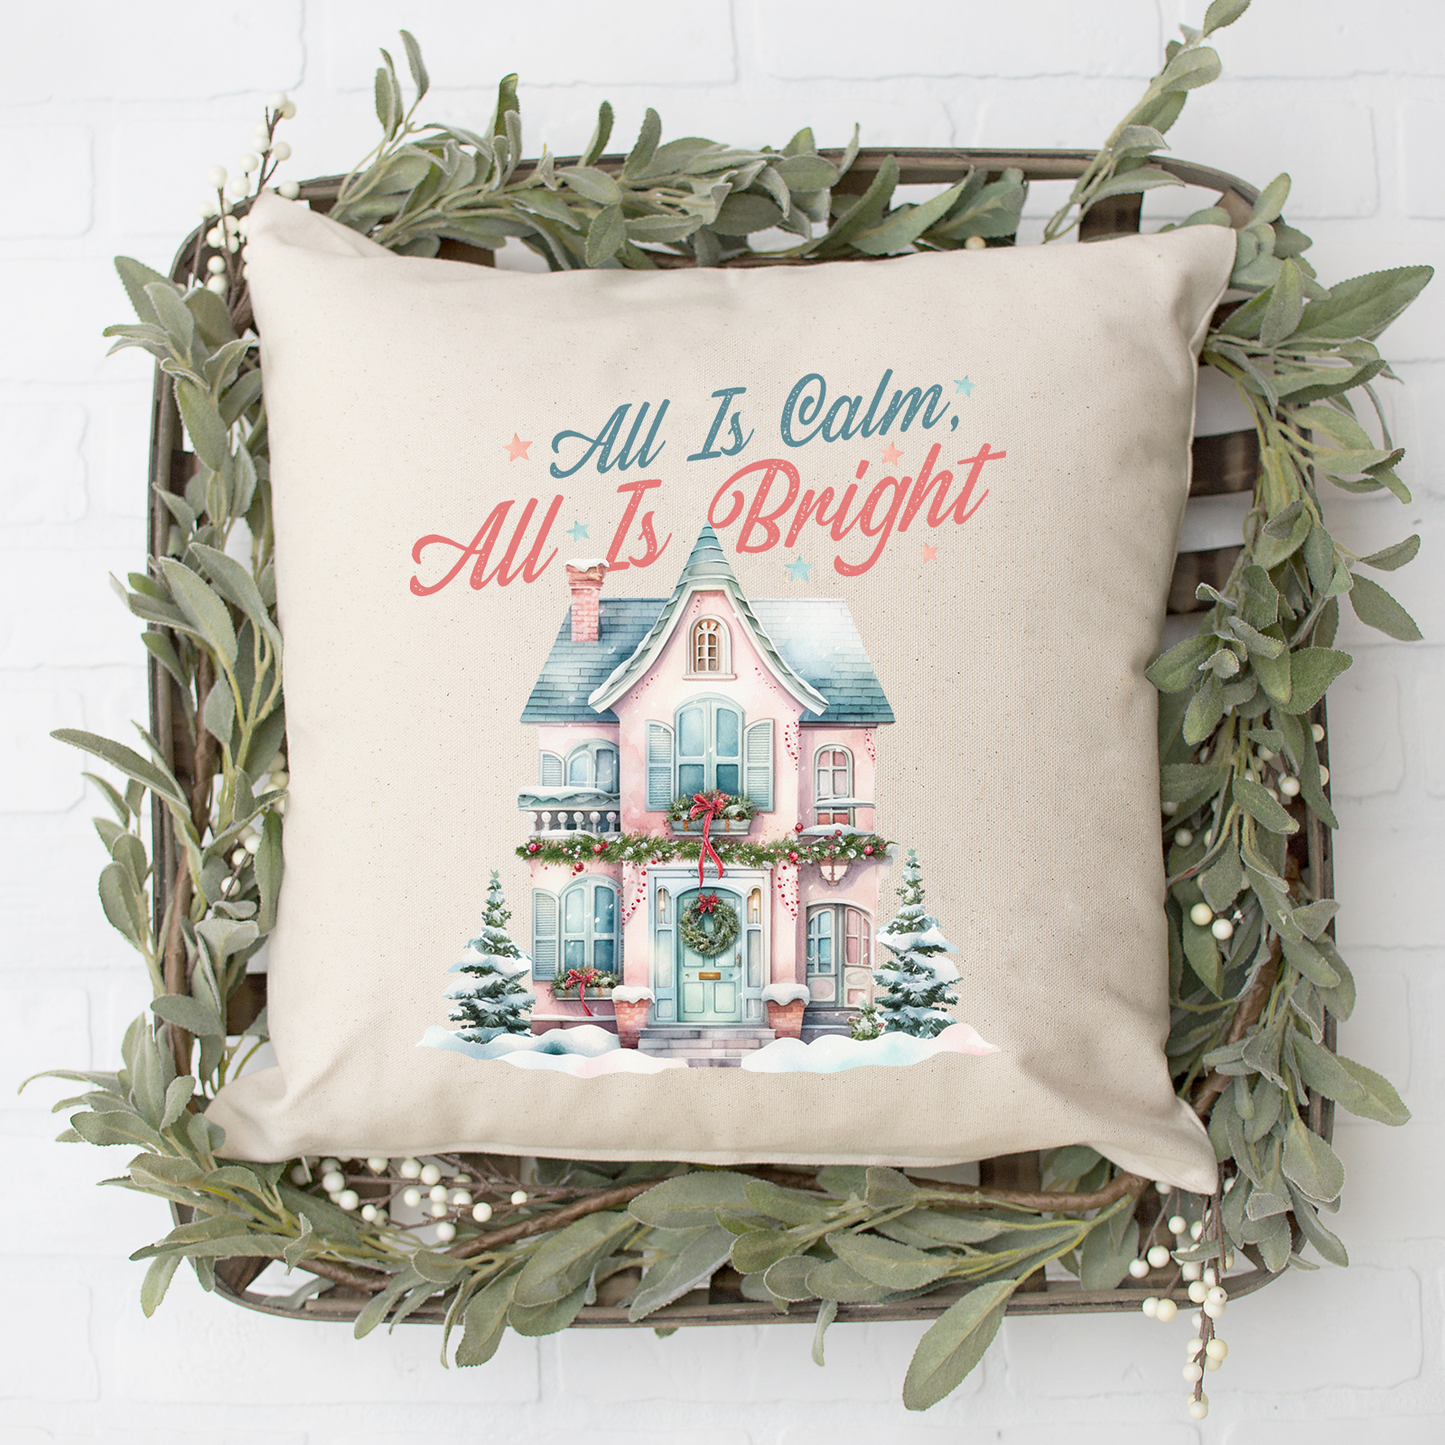 All Is Calm Pillow